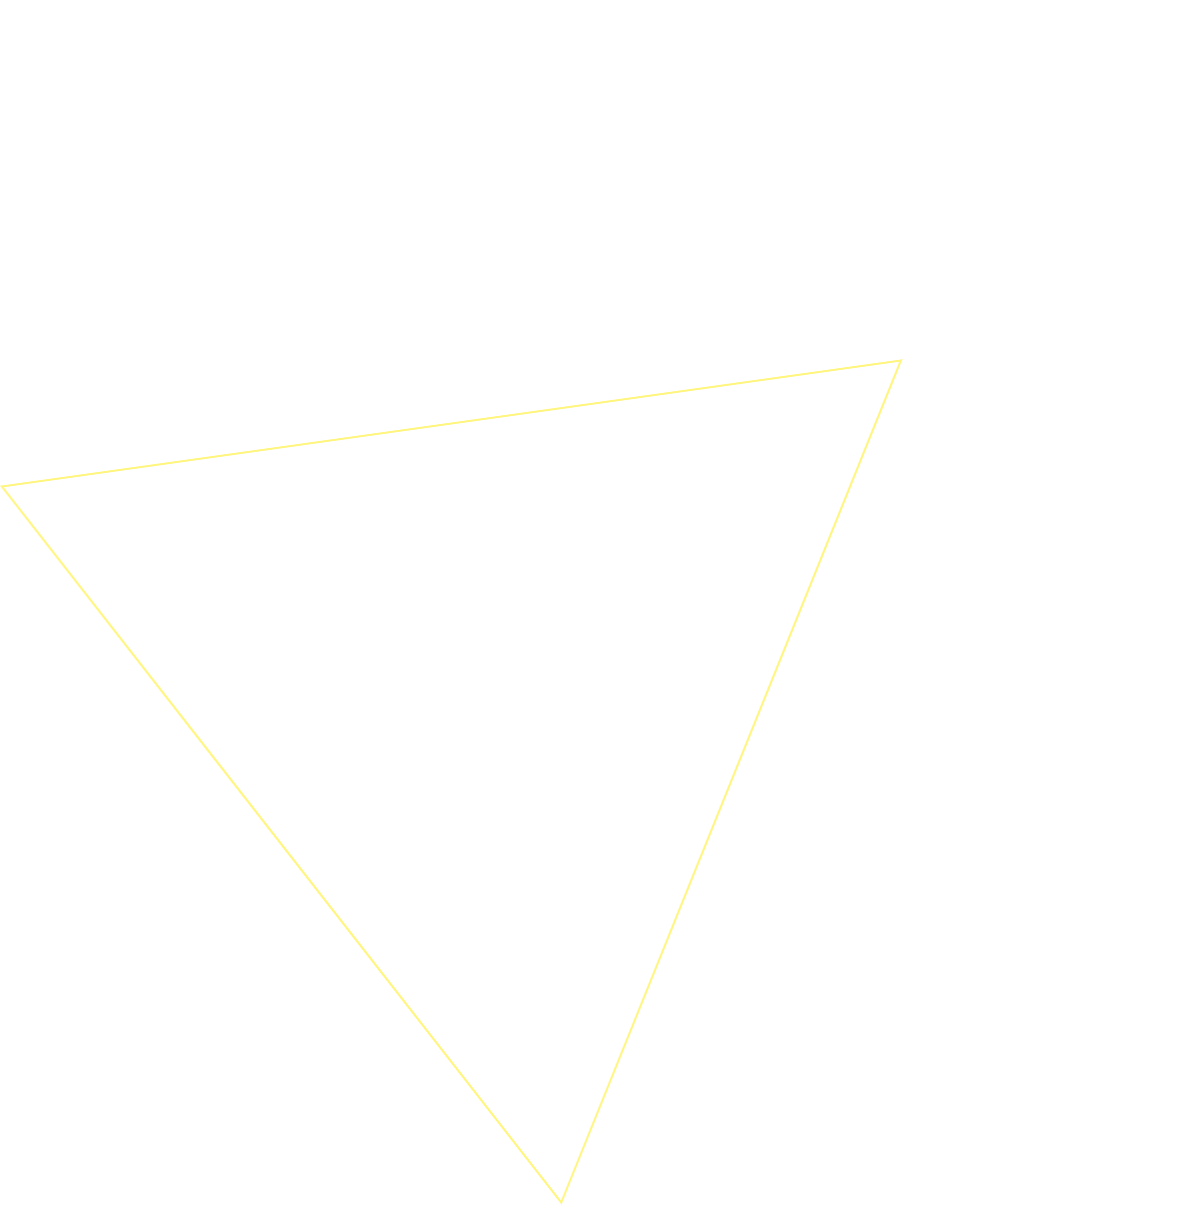 an opaque right triangle image